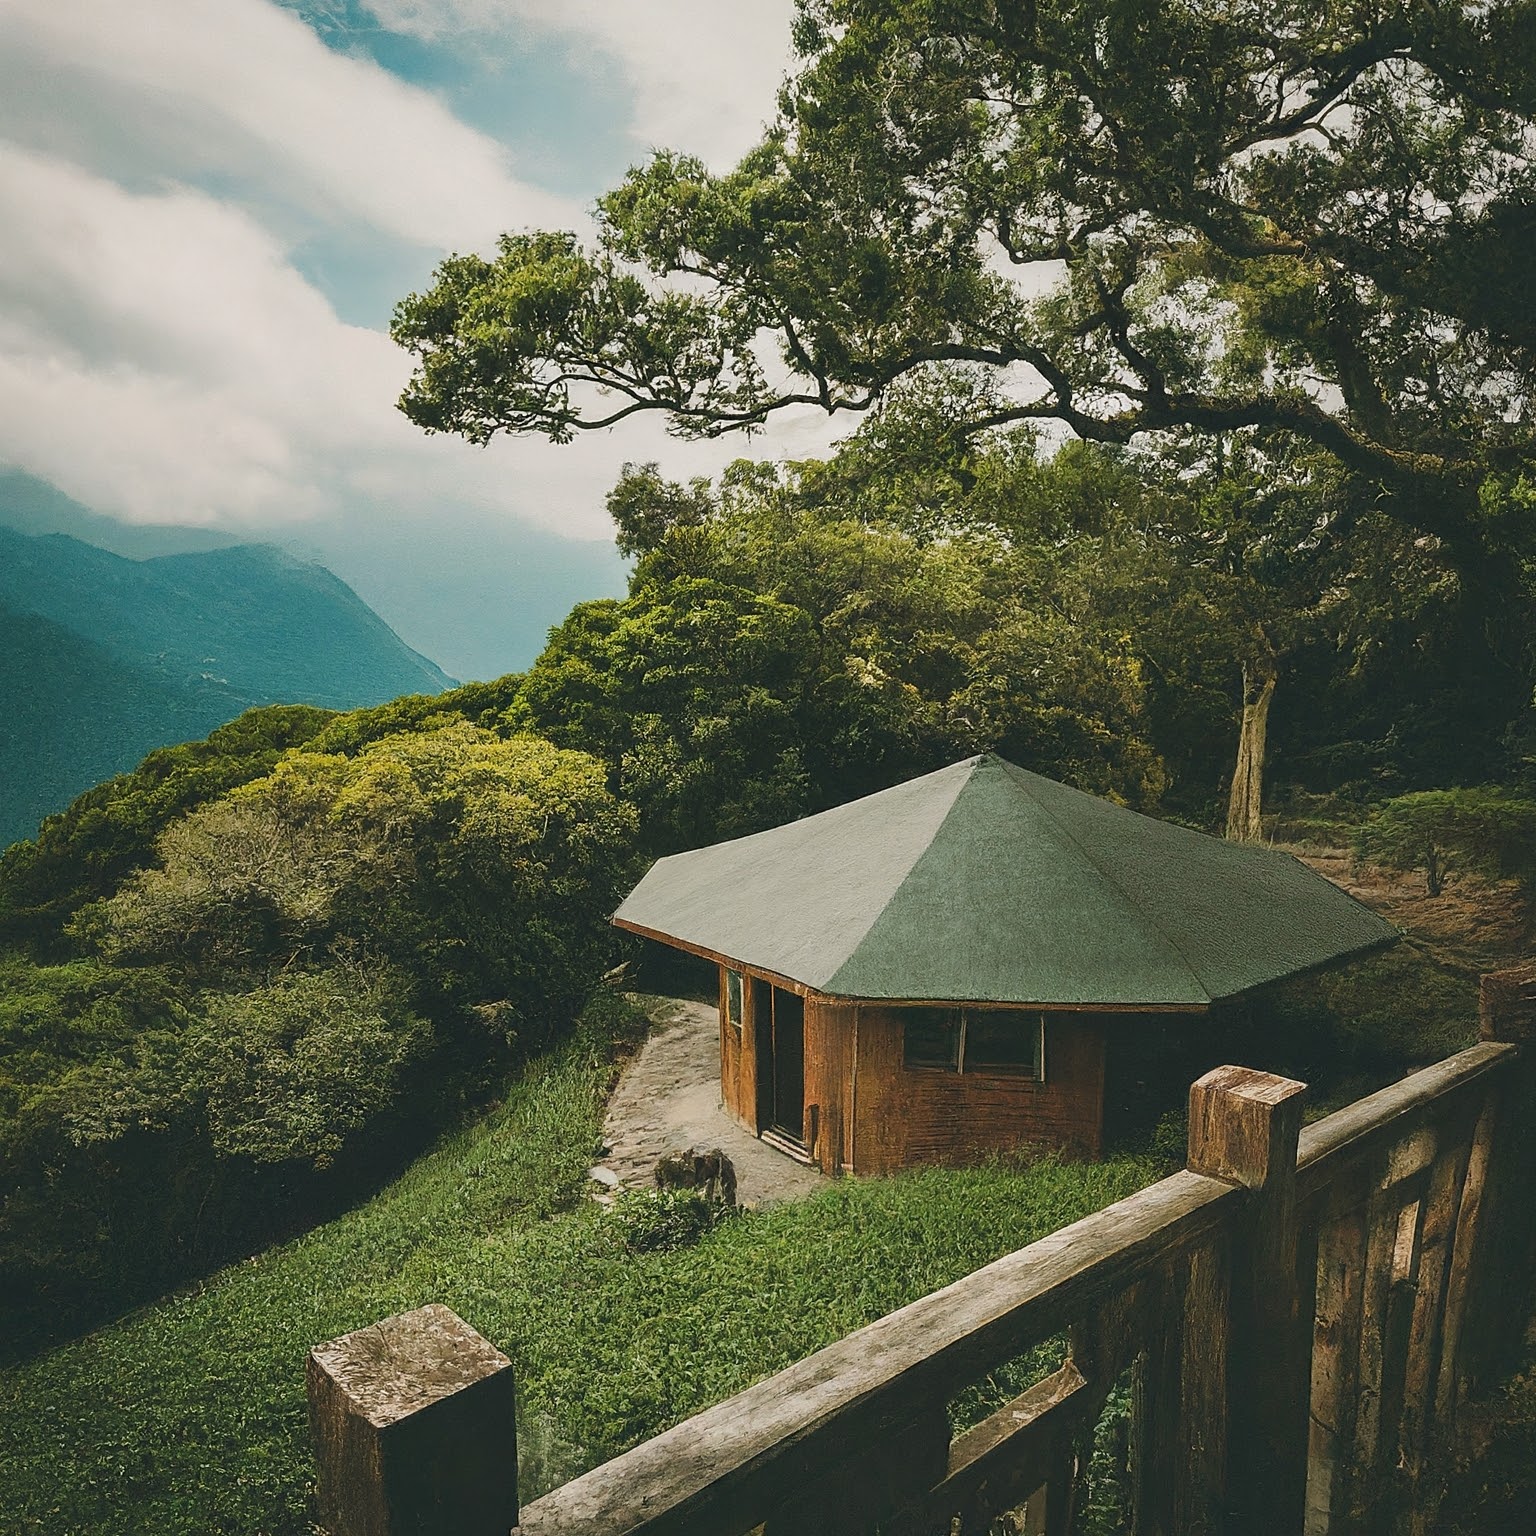 Traditional tea house on Elephant Mountain, Taiwan, with a tranquil setting.